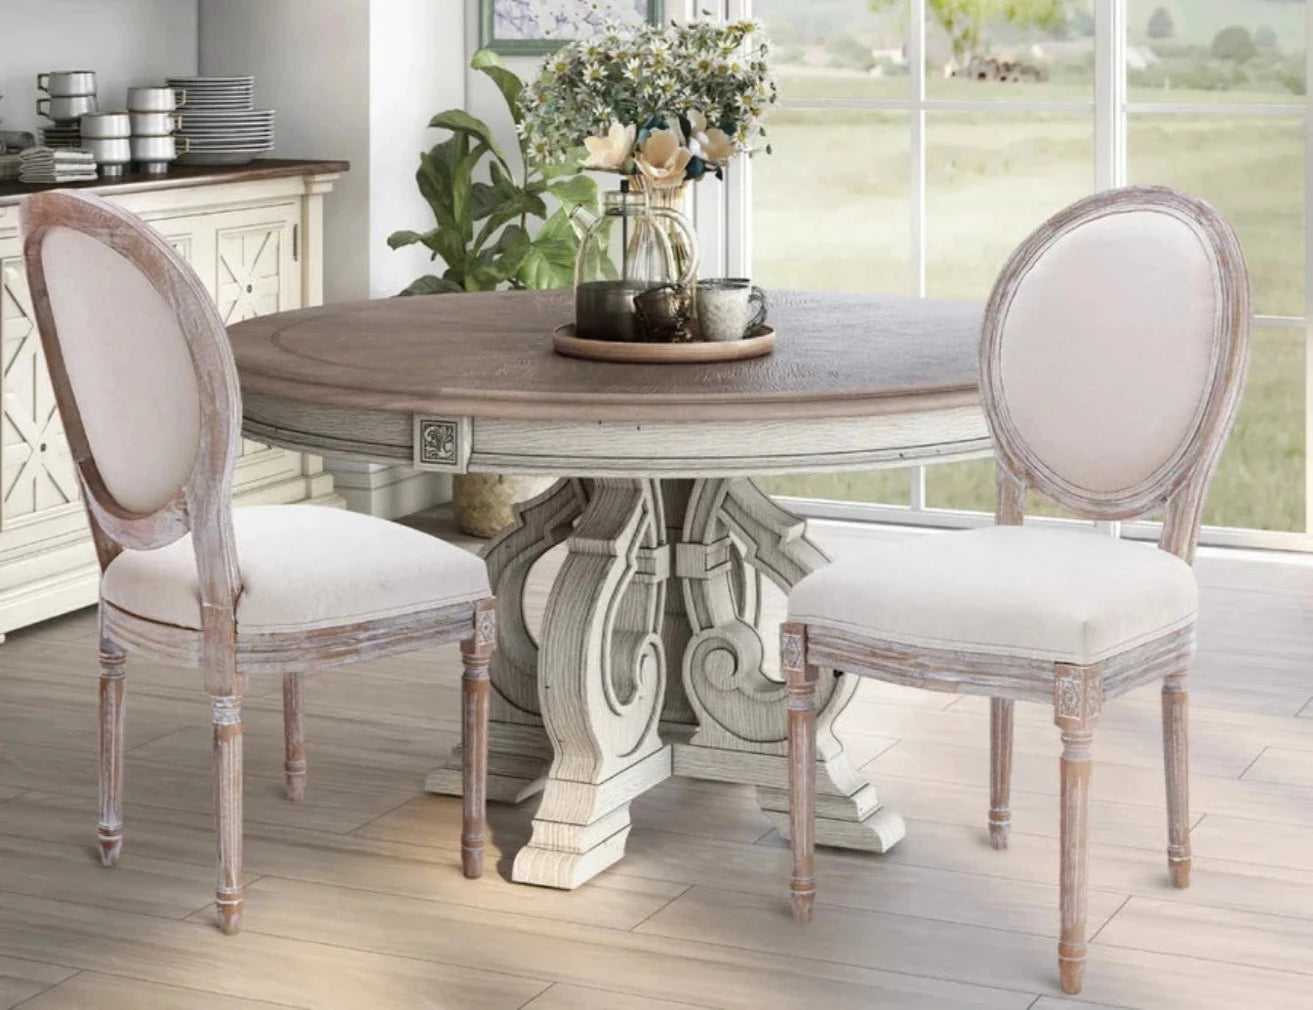 French Country Vintage Dining Chairs with Round Back, Set of 2, Solid Wood Legs, Accent Side, Upholstered for Farmhouse, Dining Room, Kitchen/Living Room/Bedroom-Classic Beige $79